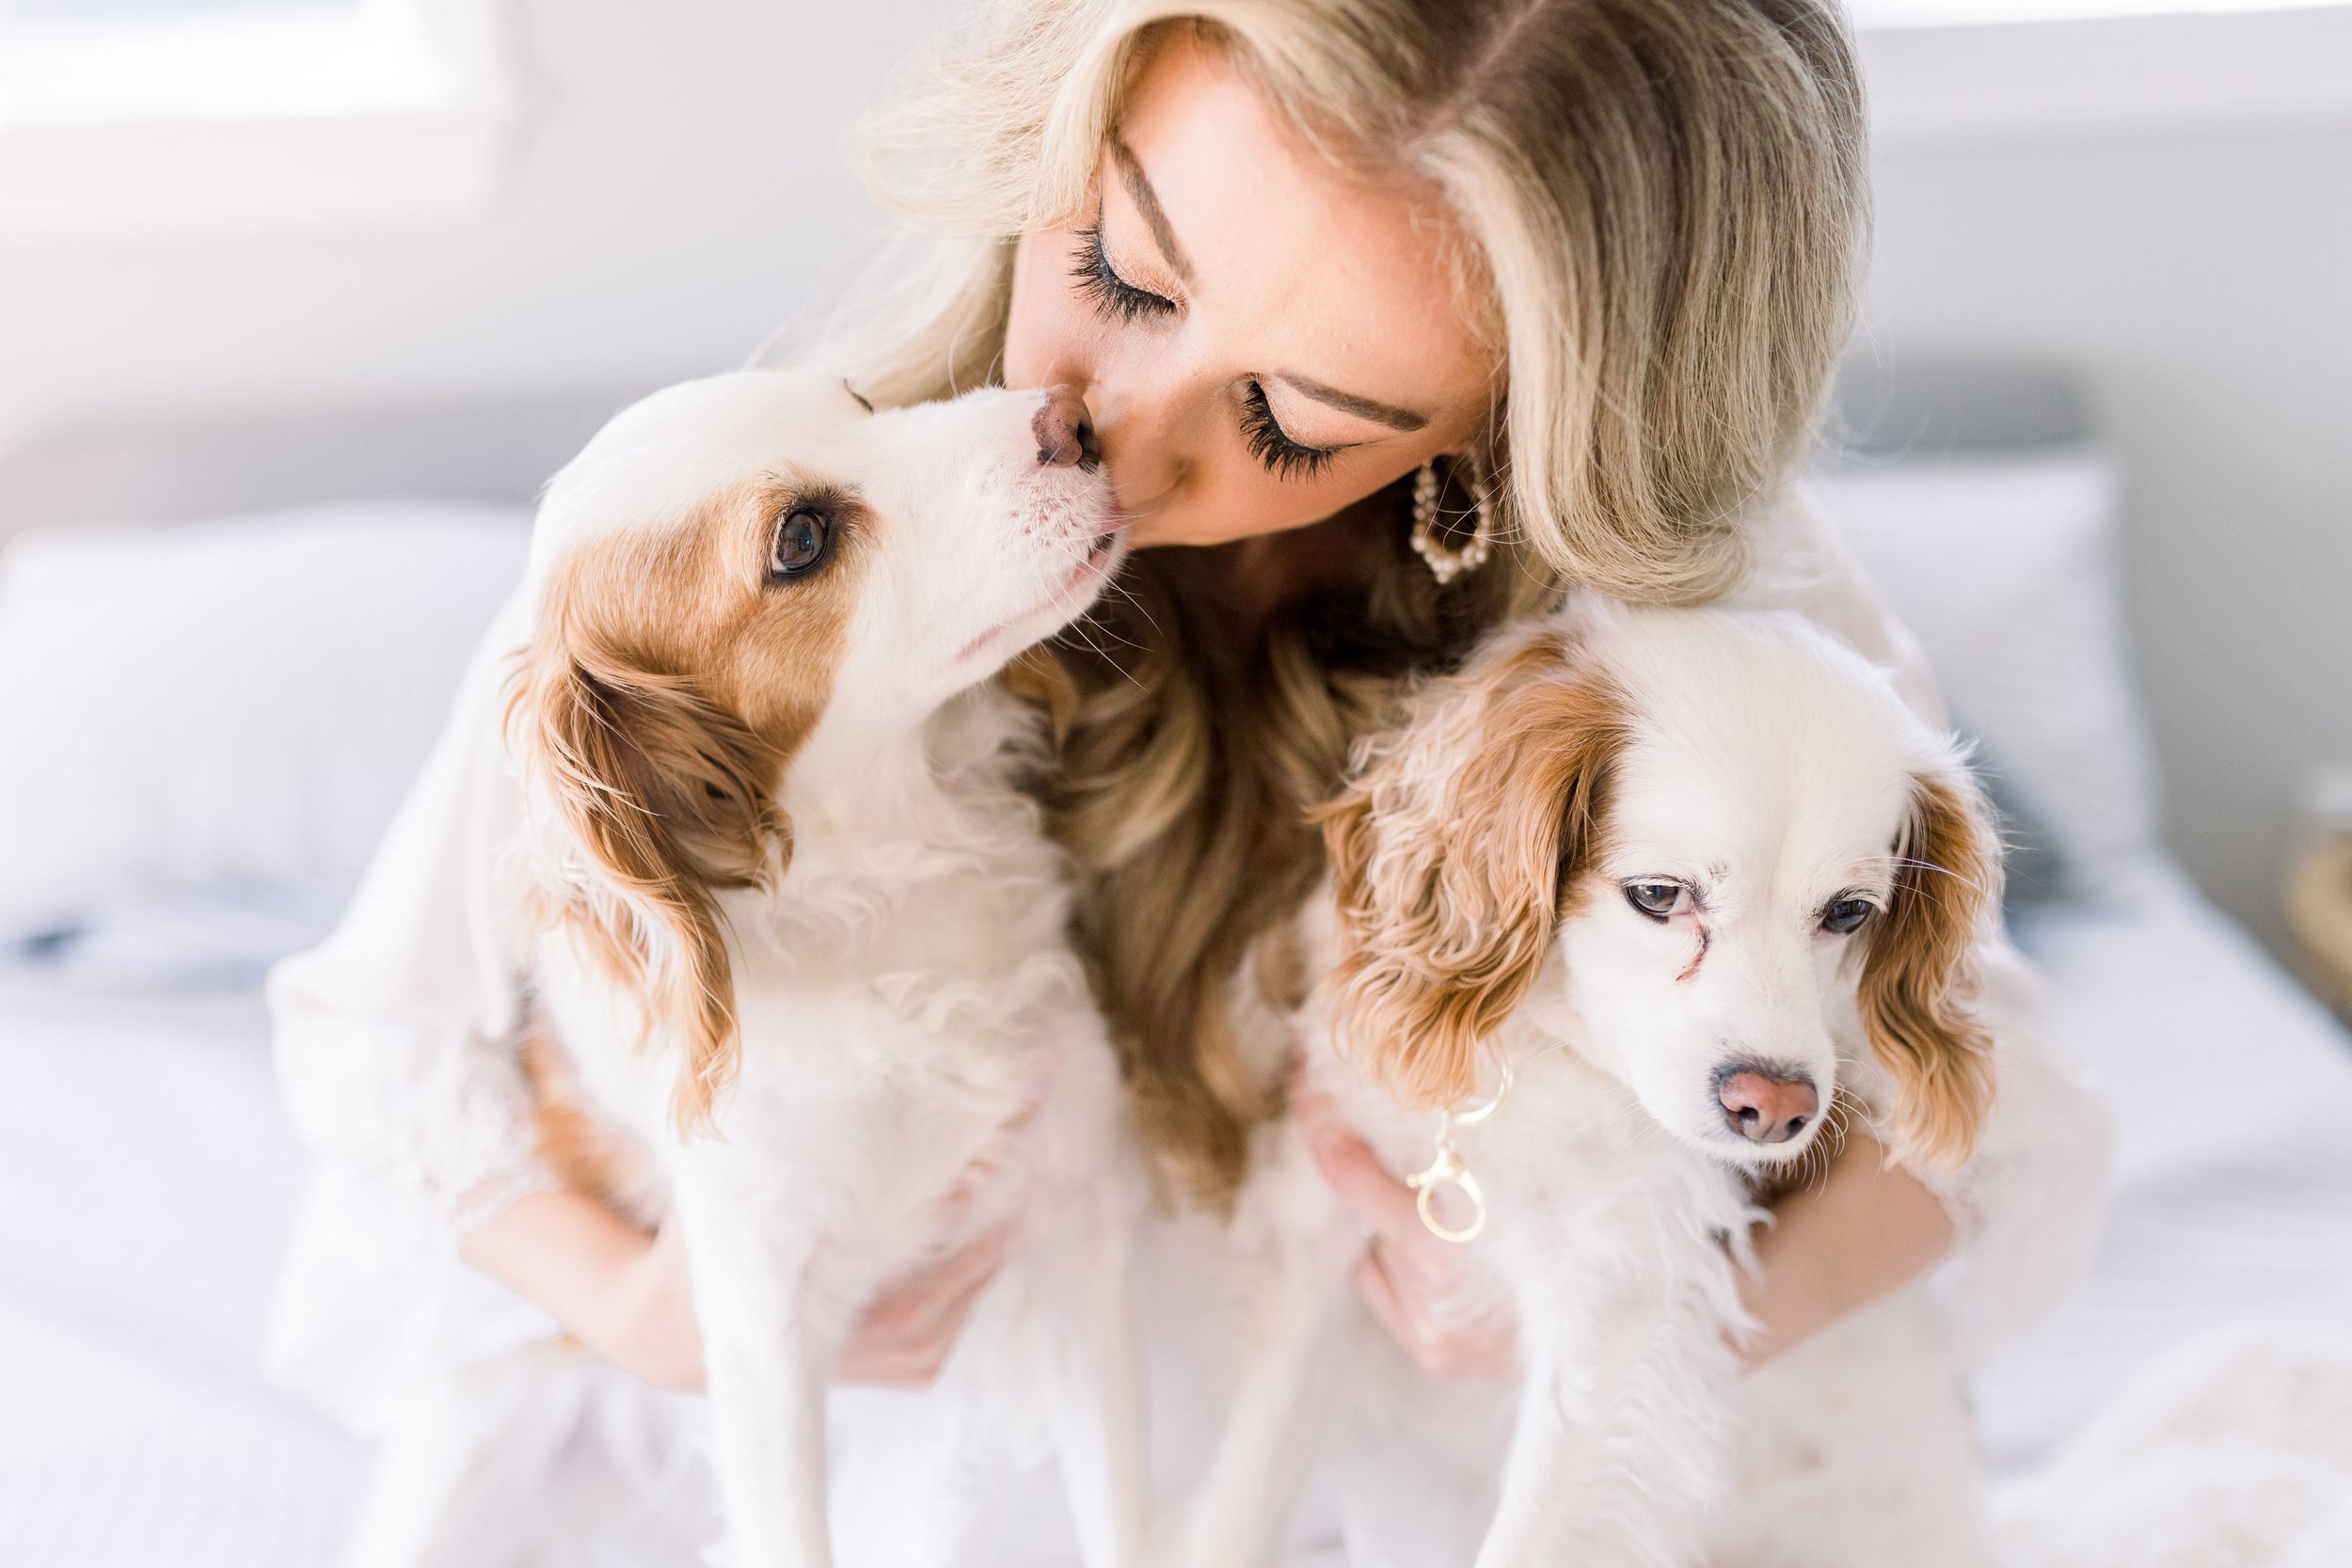  Close up of the bride kissing her two puppies on her wedding day by Chelsea Mason Photography. Fur babies in wedding #ChelseaMasonPhotography #ChelseaMasonWeddings #PrinceEdwardsCountyWeddings #SandbanksWeddings #ONweddingphotographer 